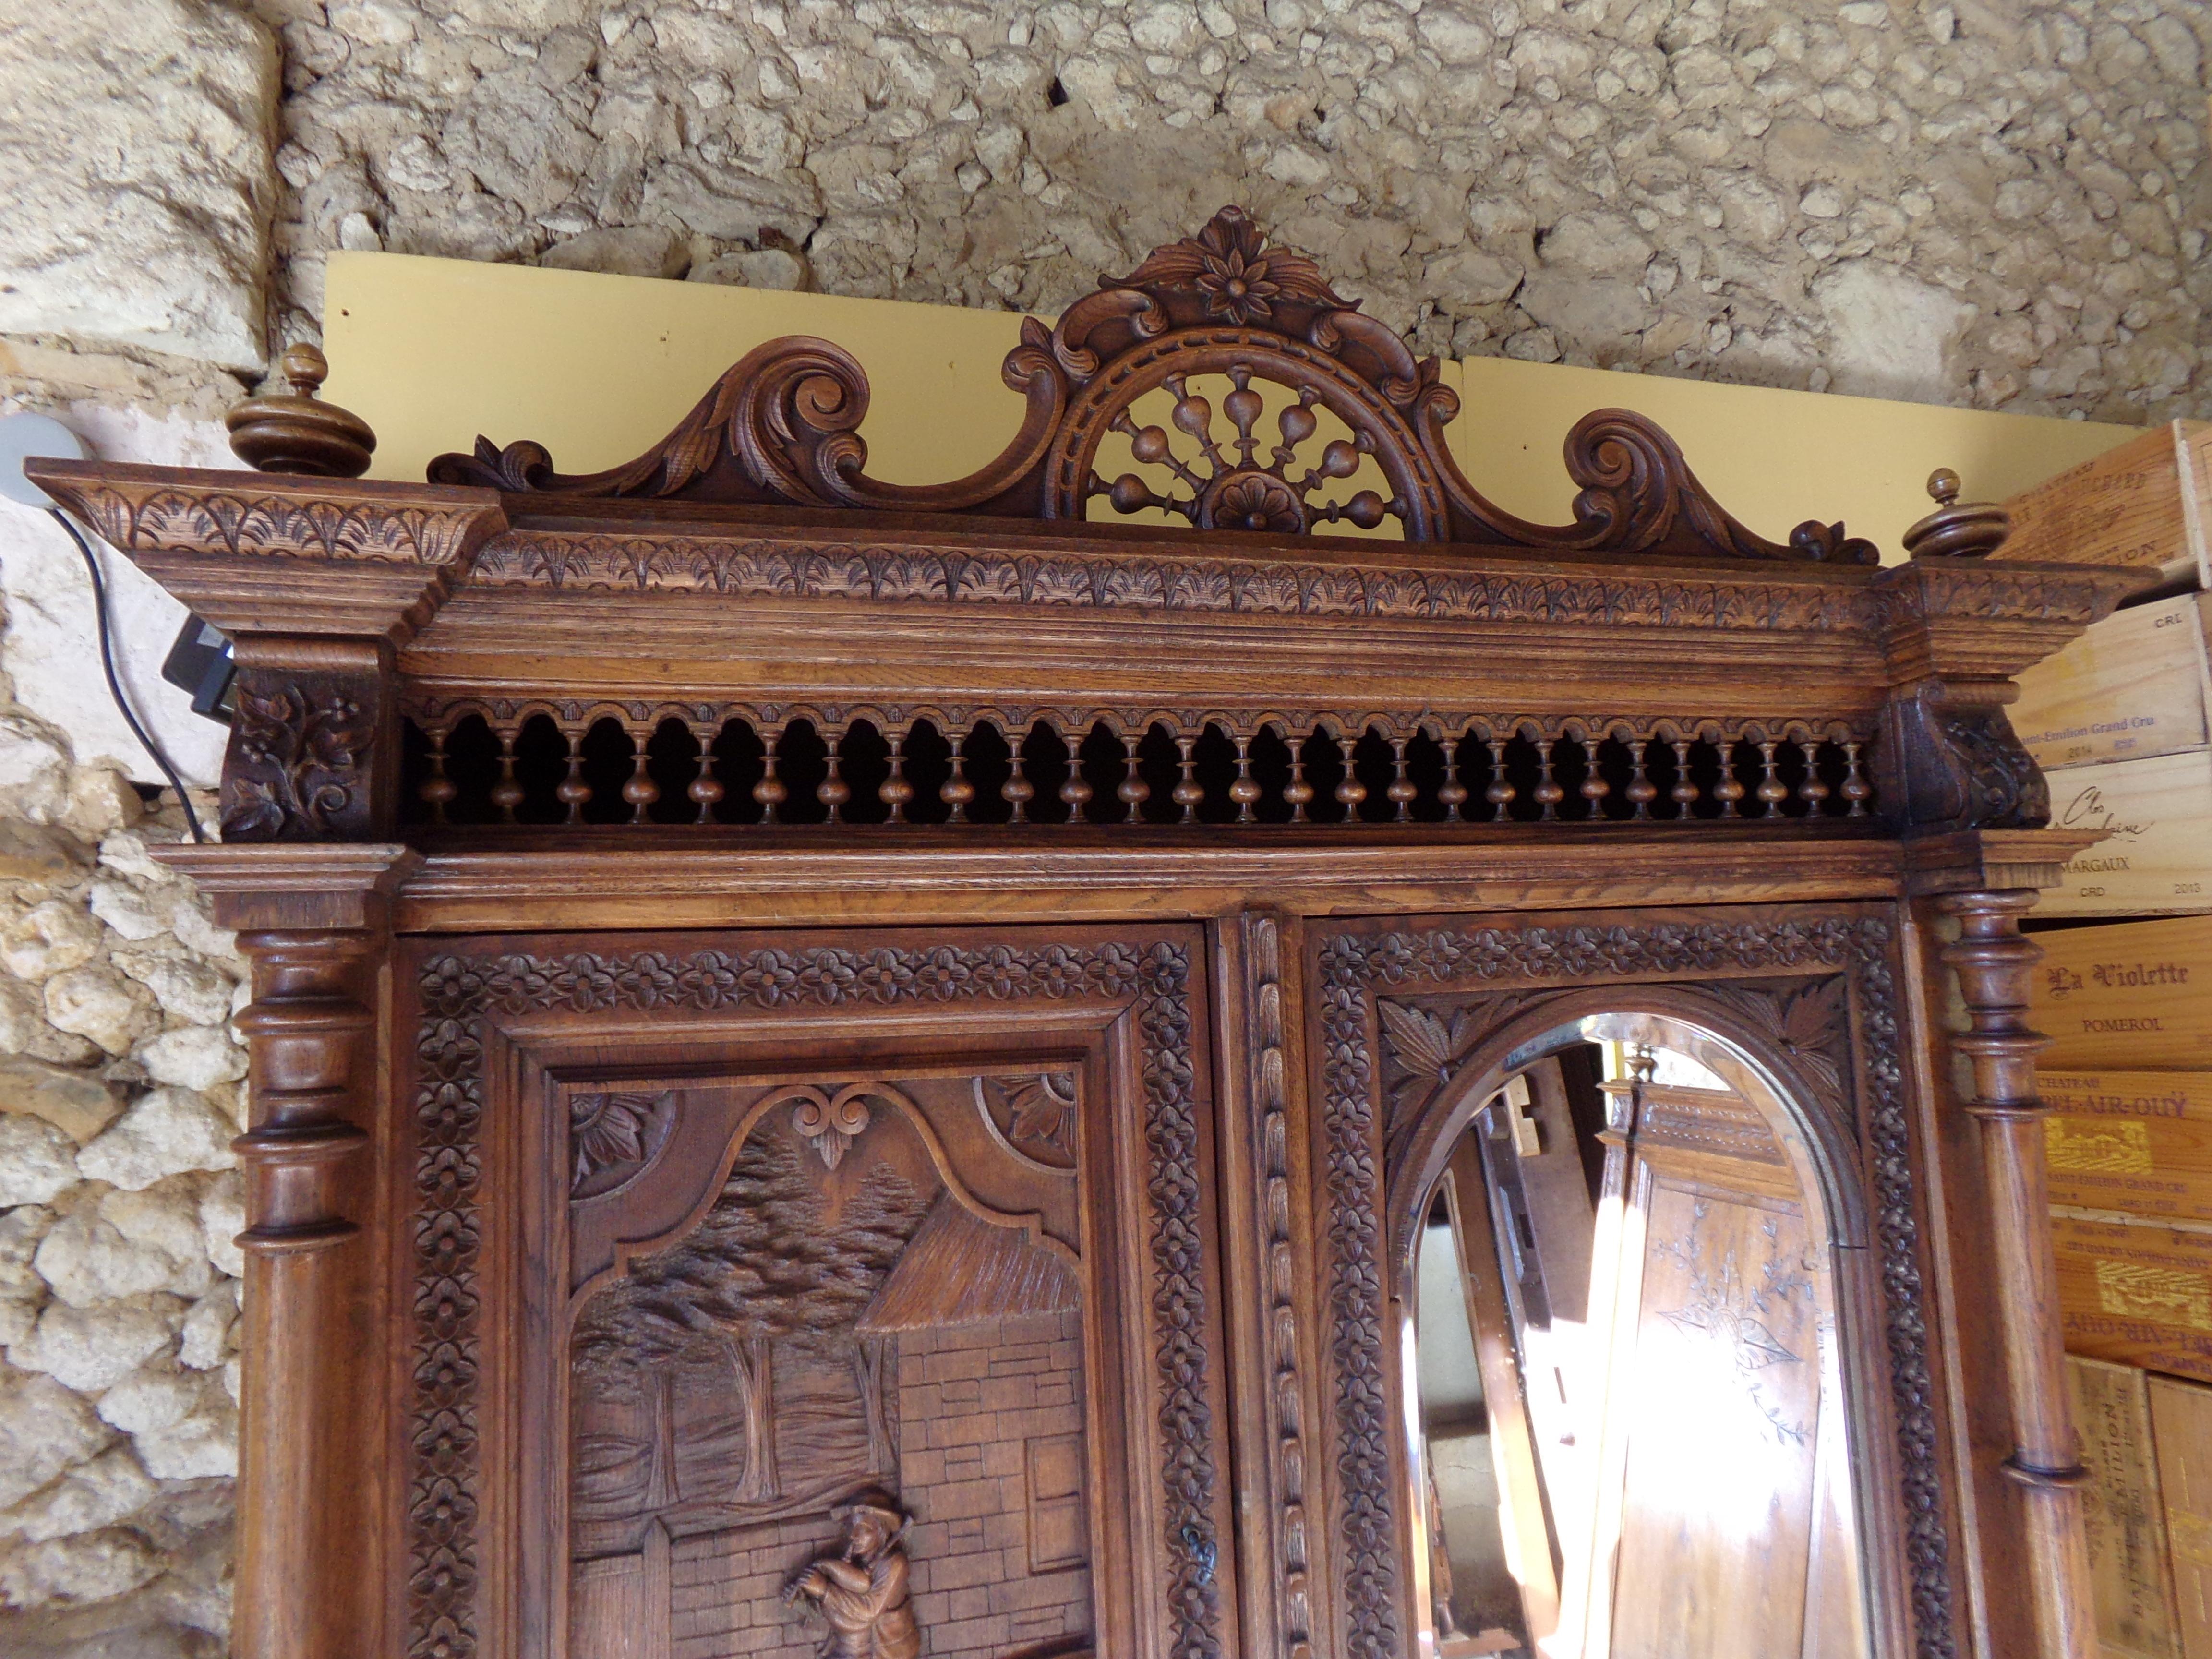 A rare opportunity to own an outstanding carved Breton Oak Compendium Armoire Signed by Louis-Mari Lepeutrec the famous Breton Ebaniste and sculpture. This Fine piece combines fully adjustable shelves, which can be lifted out to provide hanging